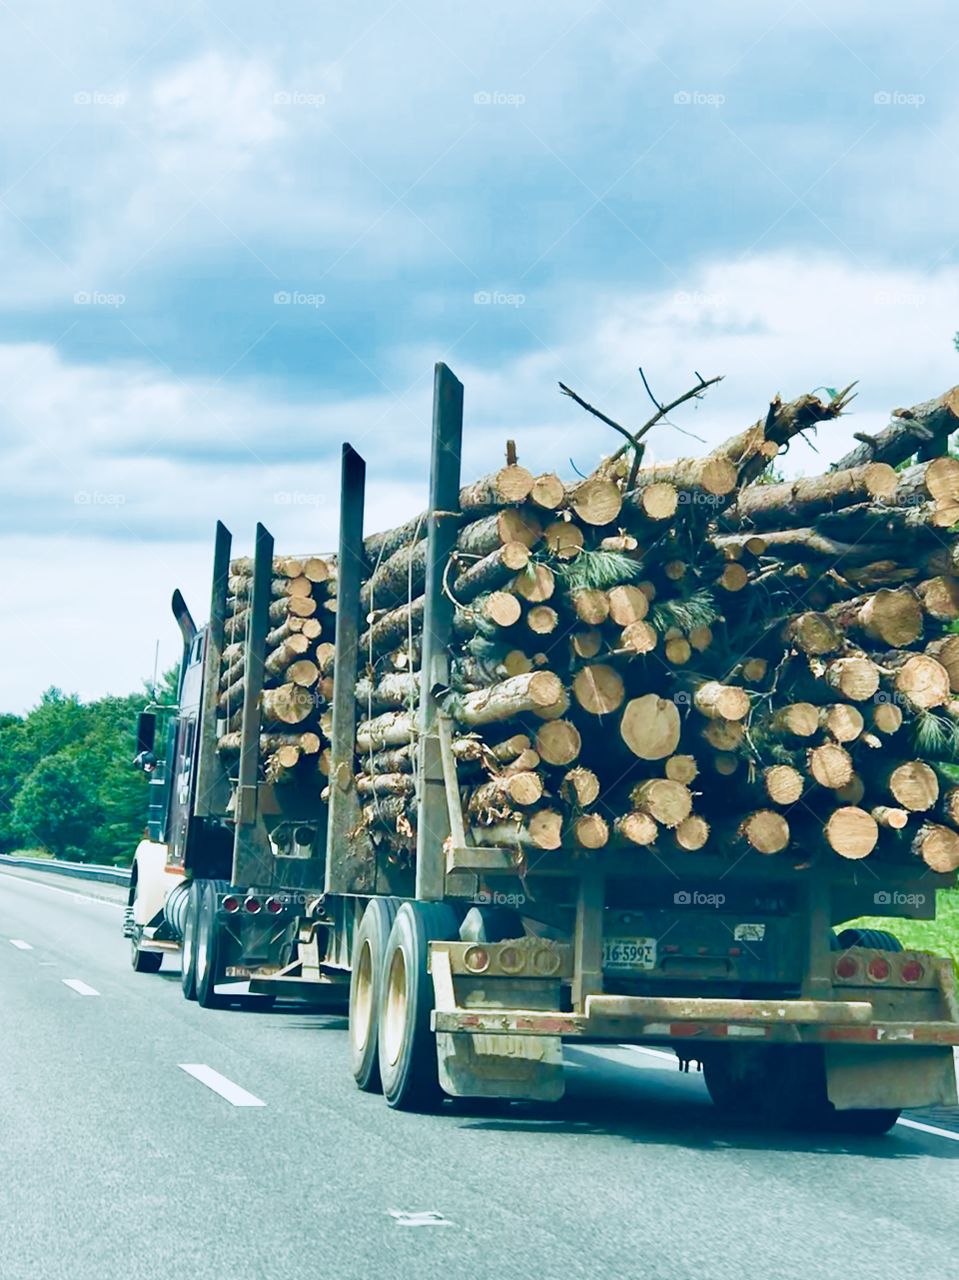 Load of timber Route 64 Virginia